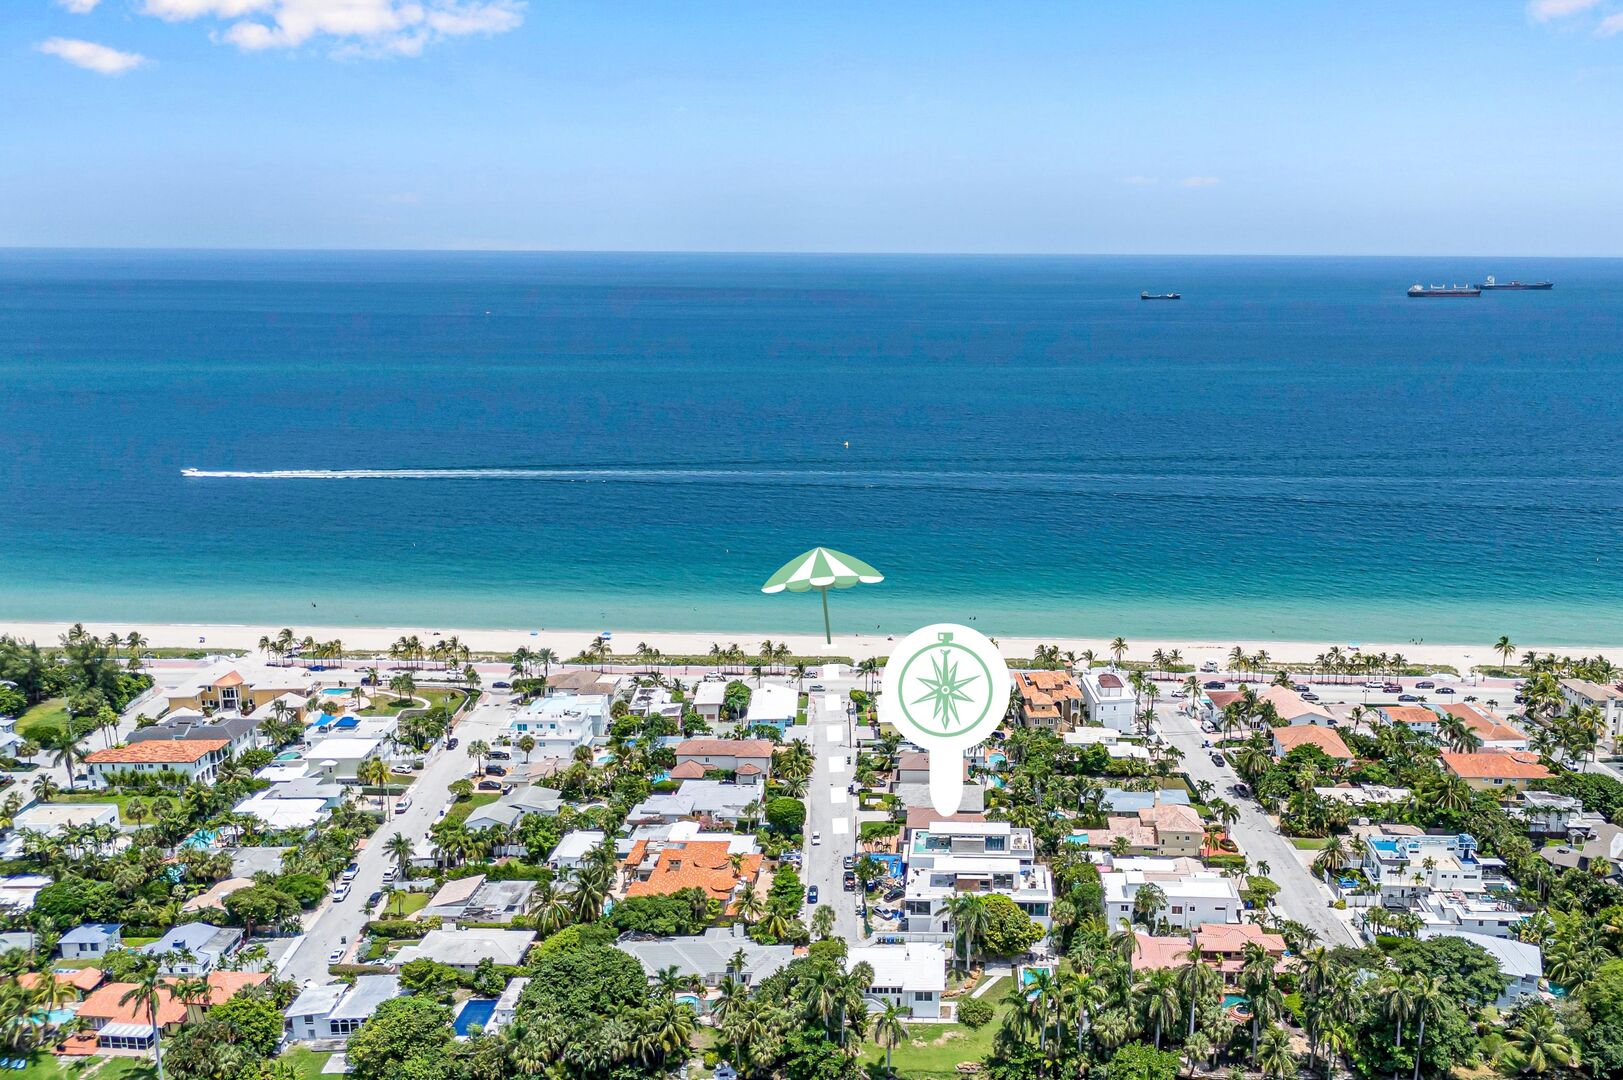 The Fort Lauderdale beach is just a few steps away. Vacation by the Ocean at its finest.